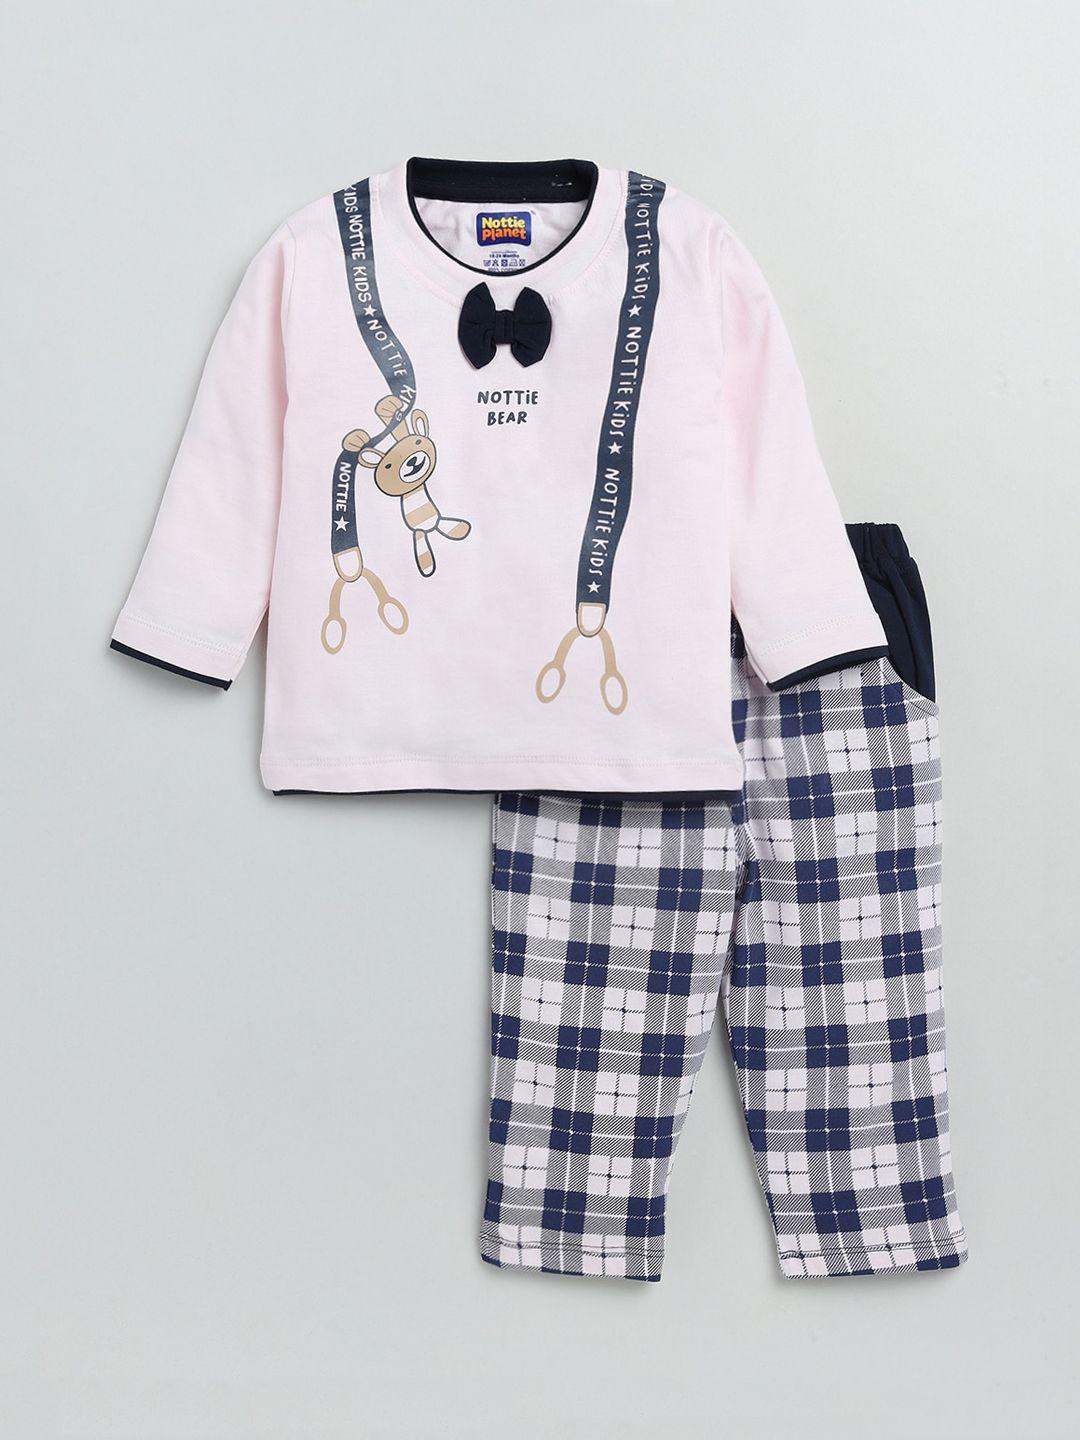 nottie planet boys pink & white pure cotton printed t-shirt with trousers